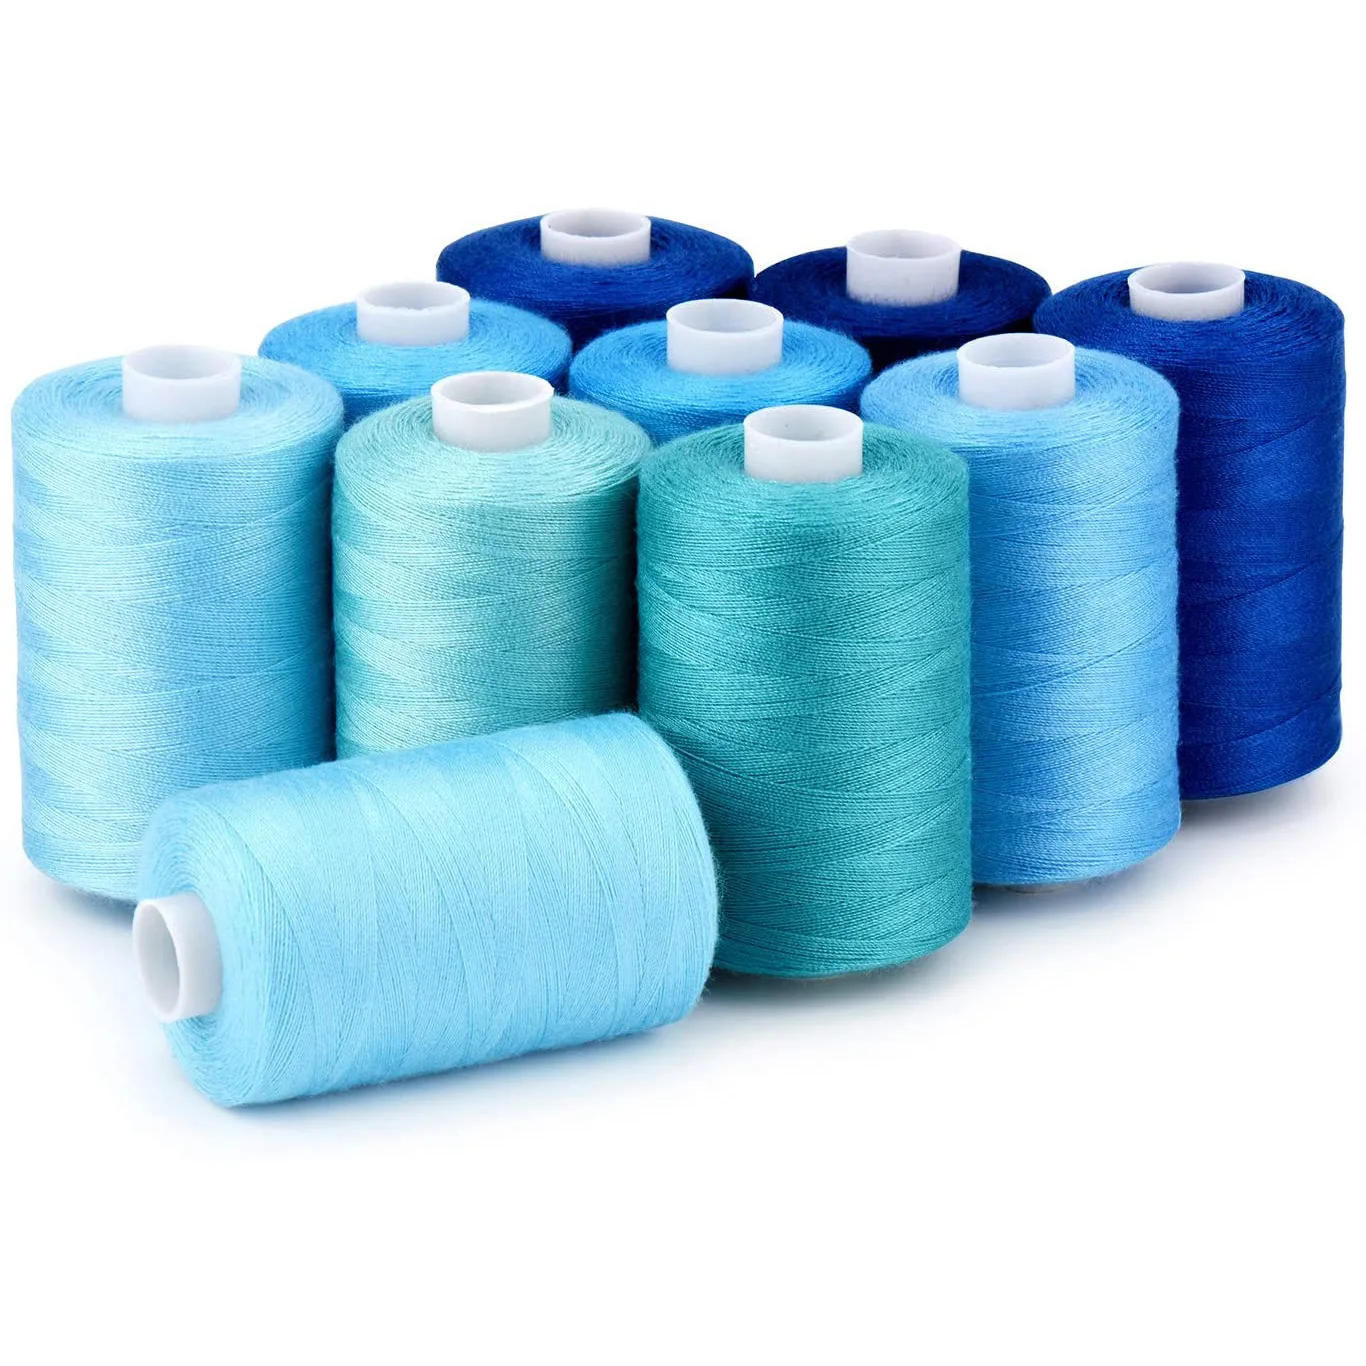 

1000 Yards Per Spool 40S/2 Polyester Sewing Thread Sets with Box 10 Blue Colors Sewing Thread for Hand Sewing Embroidery Machine